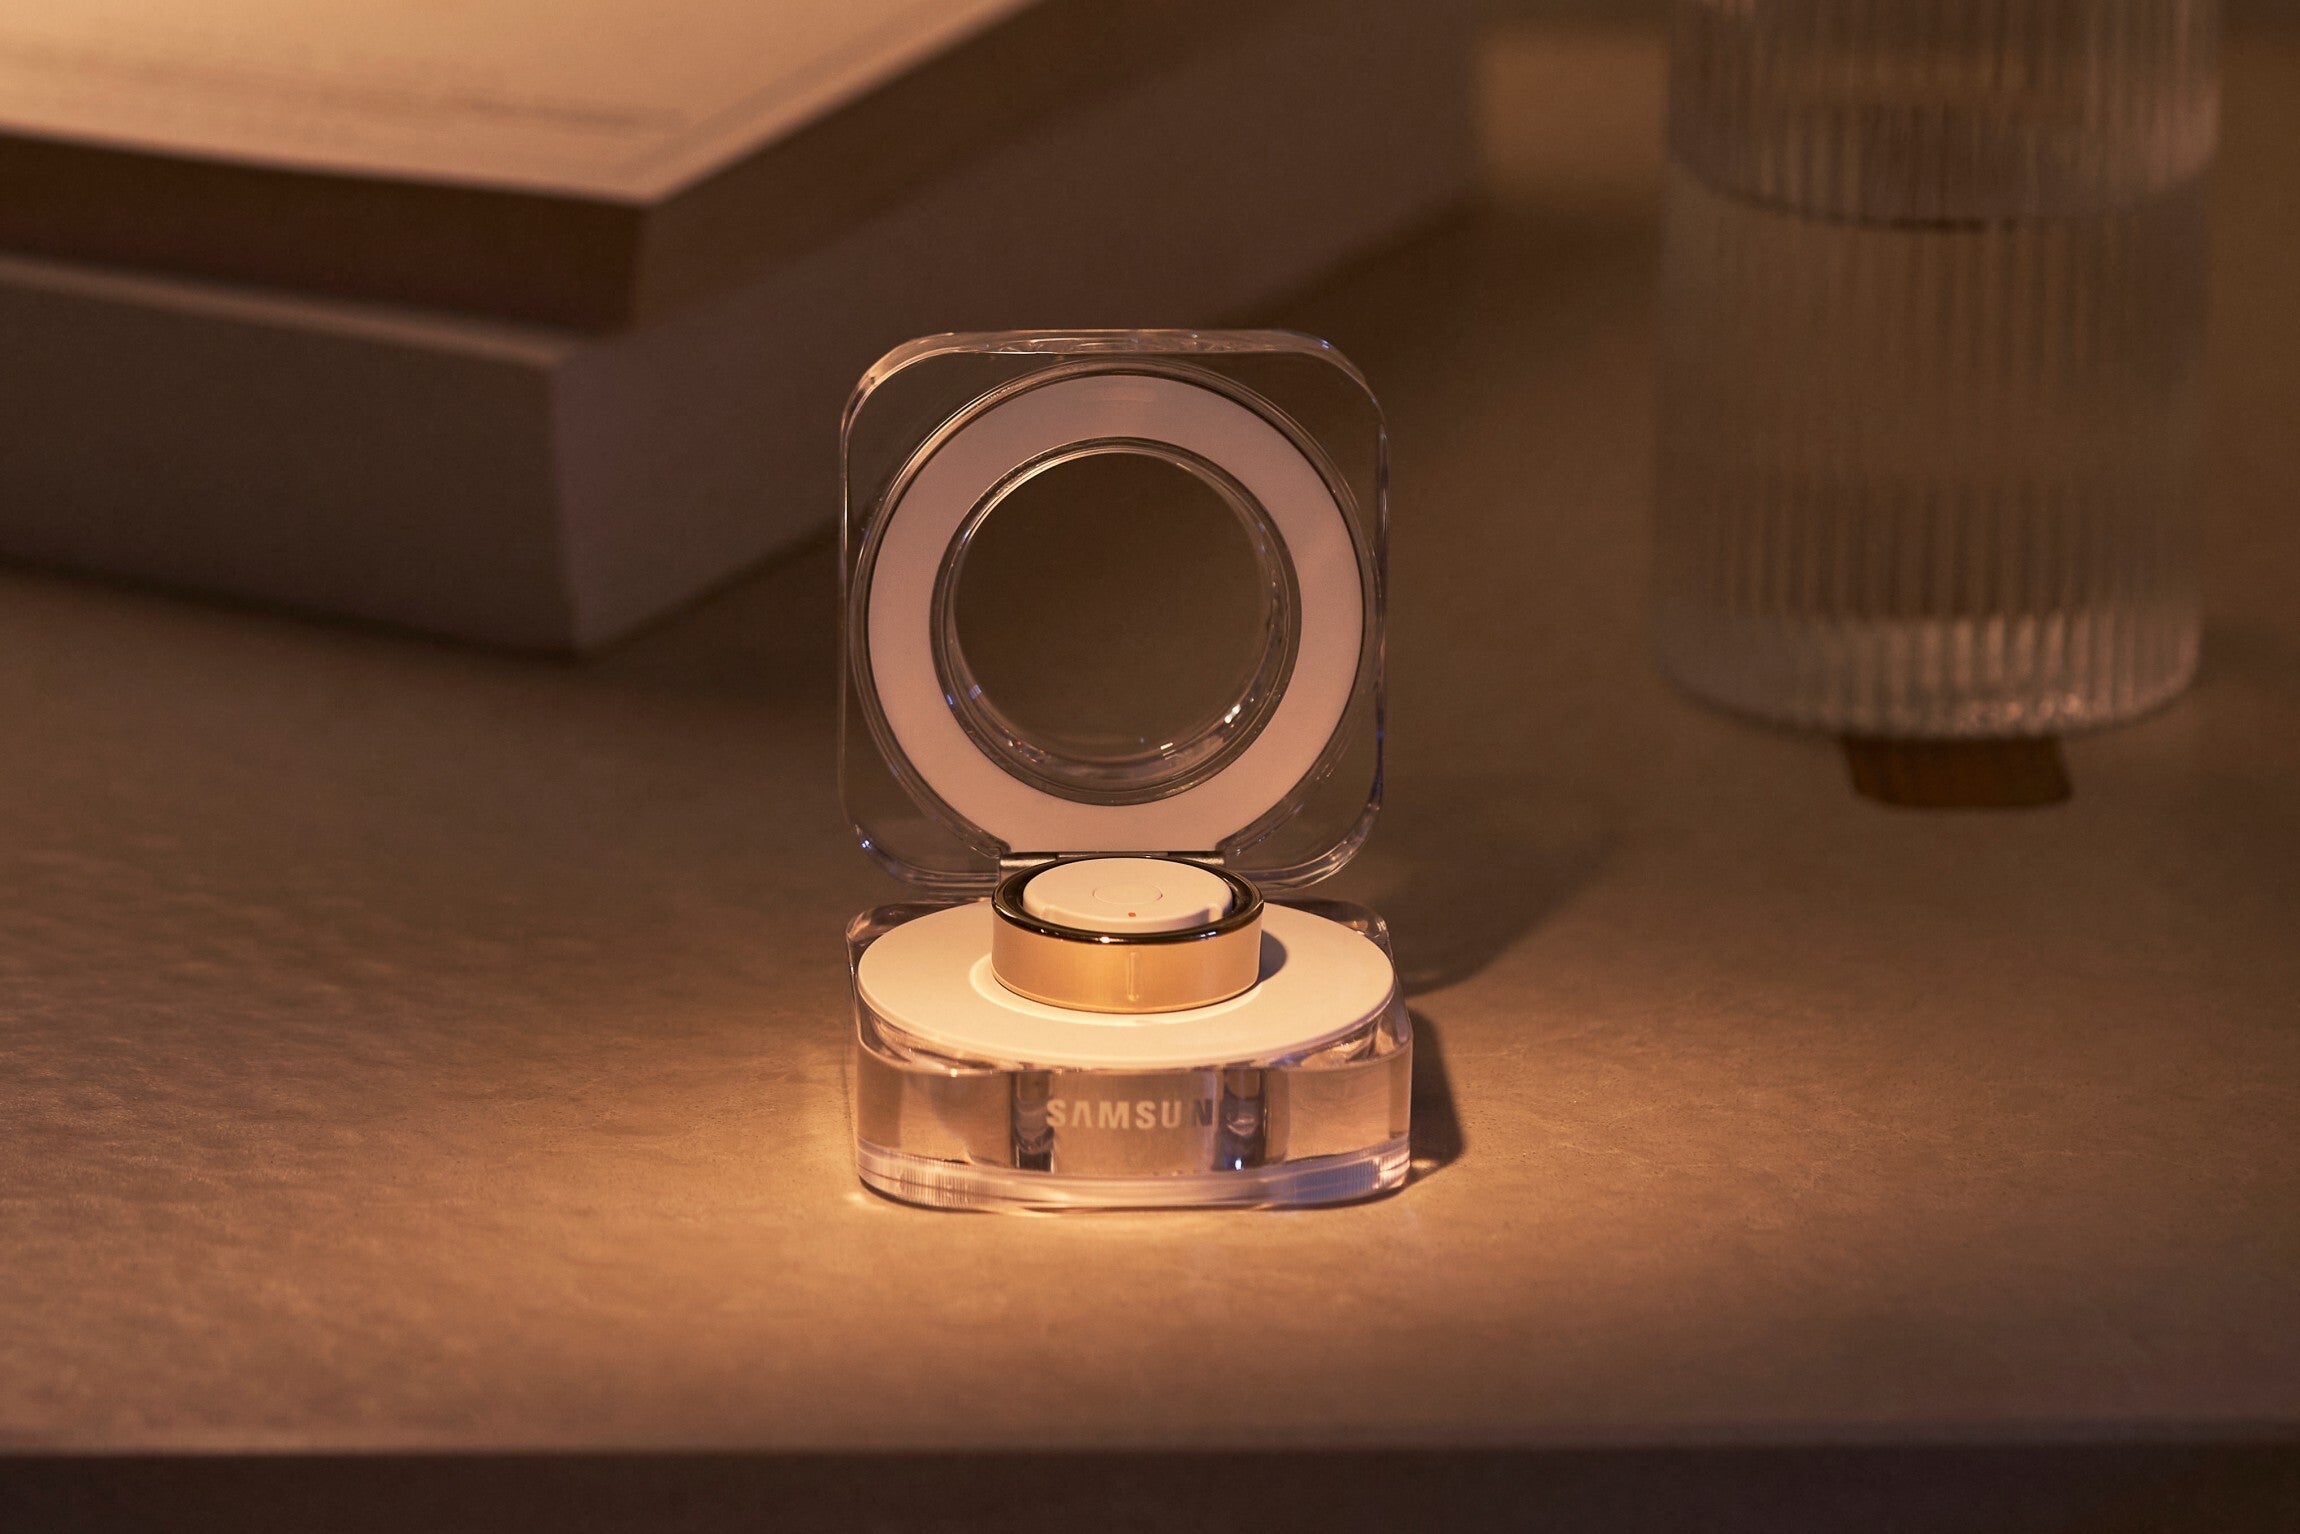 Image credit – Samsung - Samsung Galaxy Ring is official: Big power in a tiny package